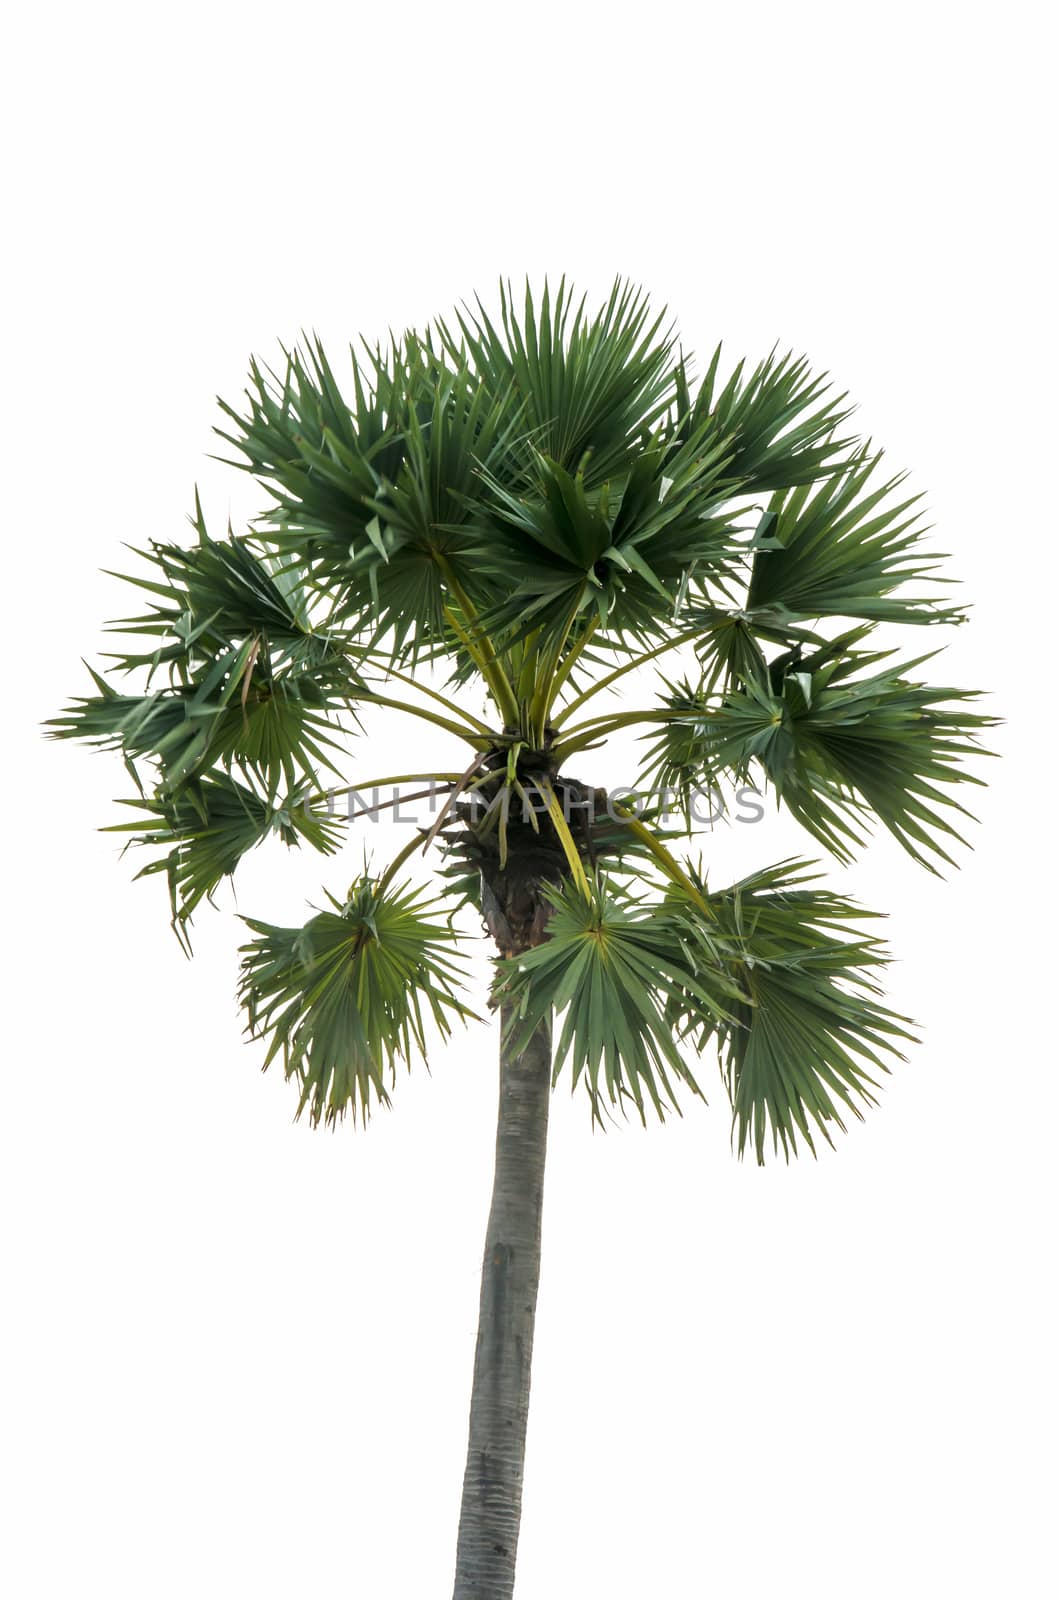 The palm trees isolated in white background.